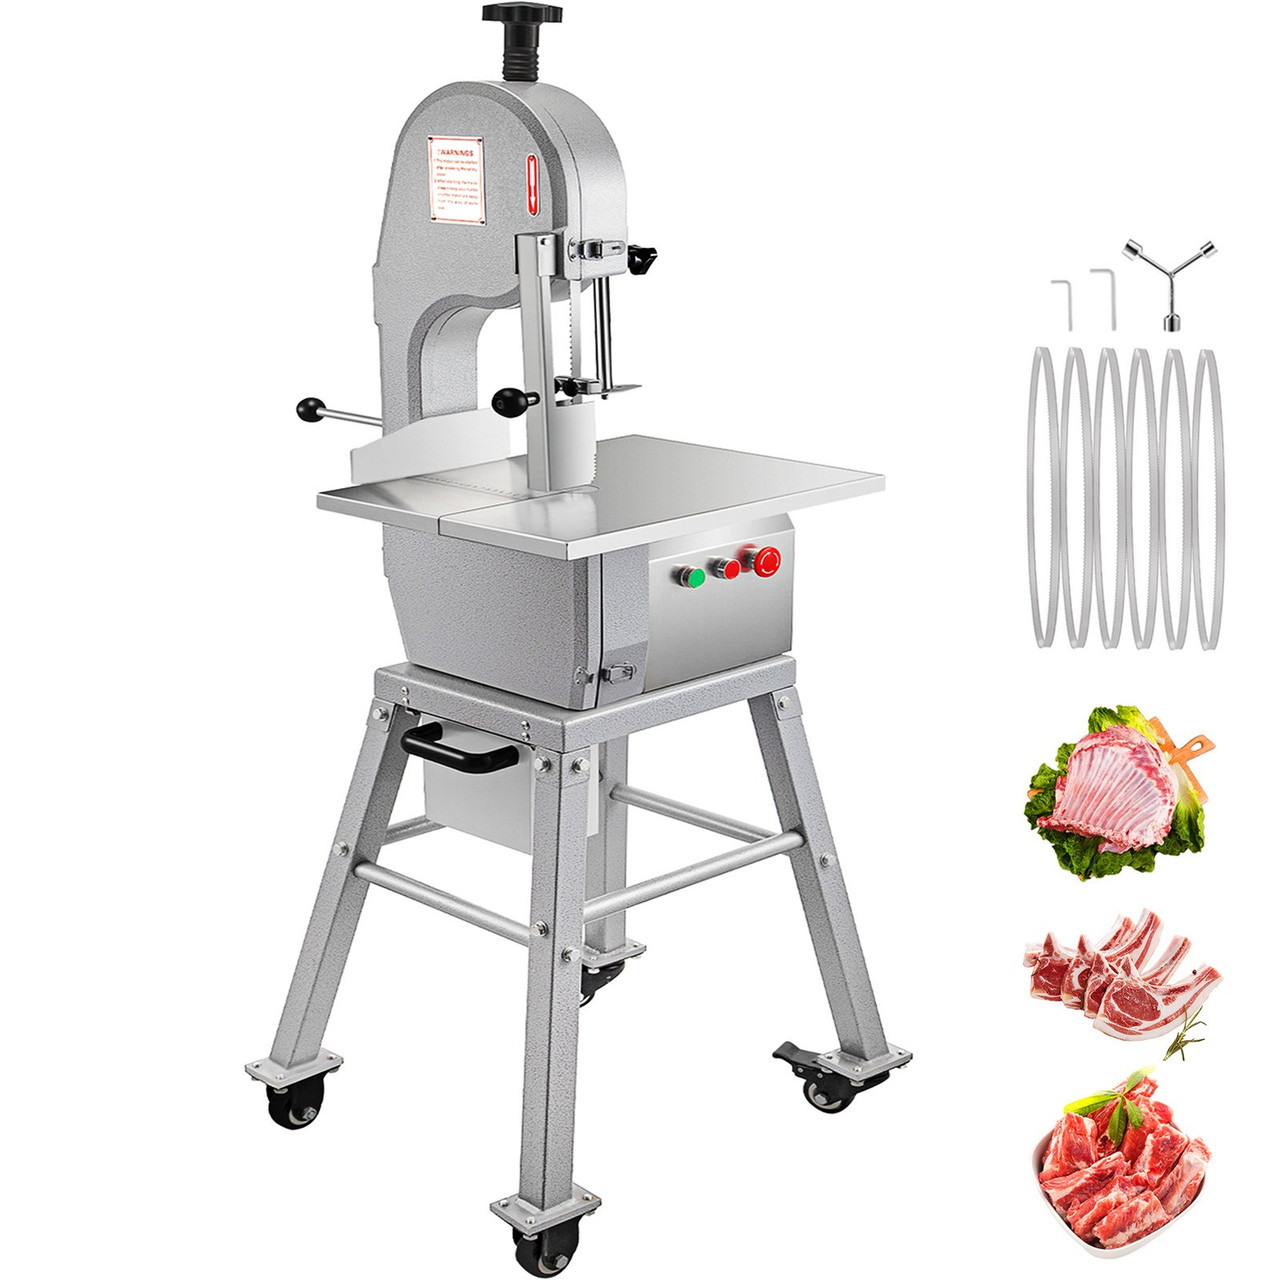 VEVOR 1500W Stainless Steel Meat Bandsaw: Commercial Bone Saw